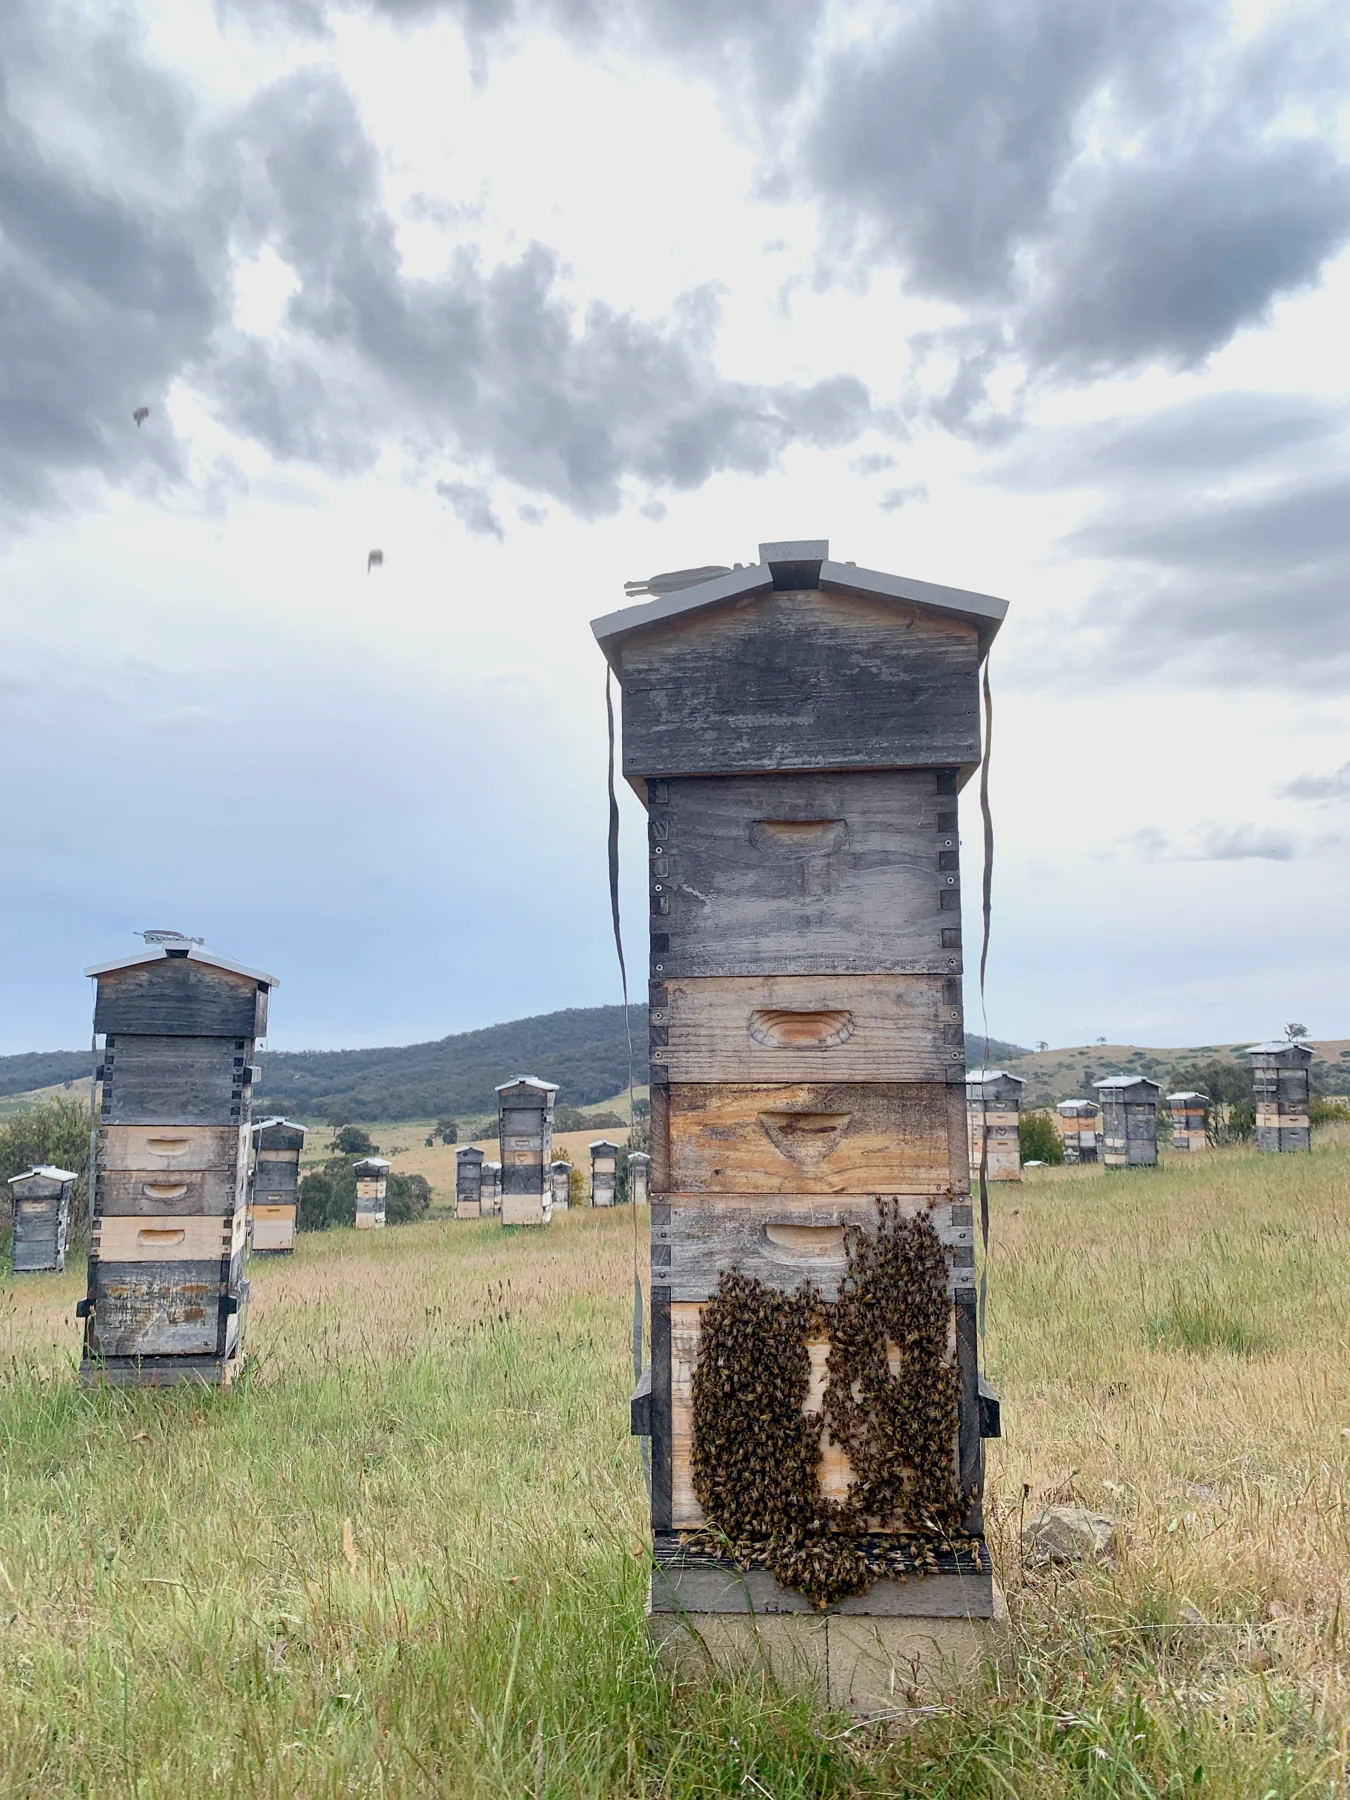 Malfroy's Gold Bees Bearding Swarm Season Central West